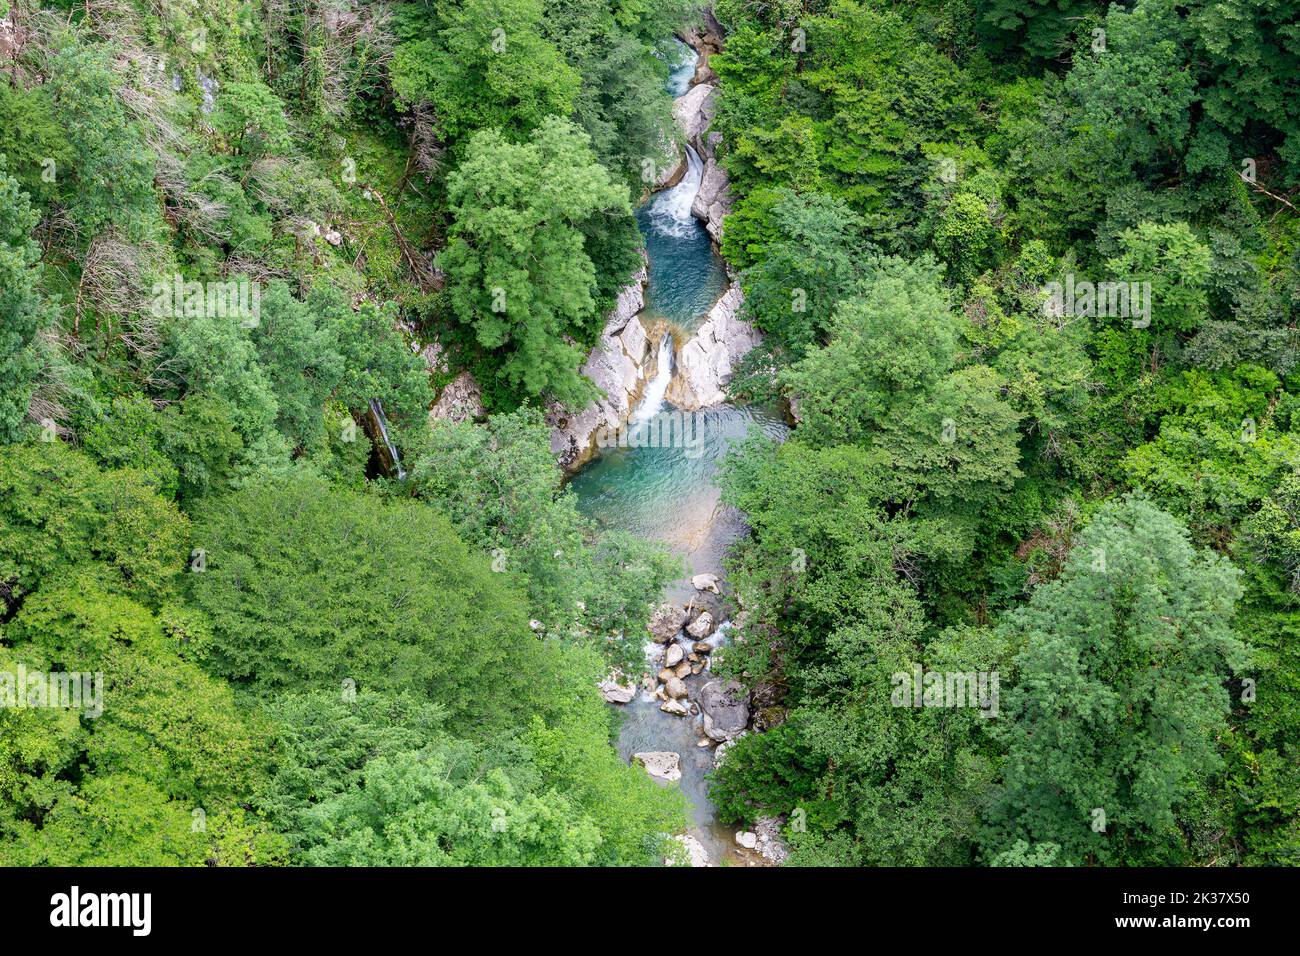 Okatse Canyon with Okatse river in Georgia, lush vibrant green vegetation and forests with river seen from above. Stock Photo